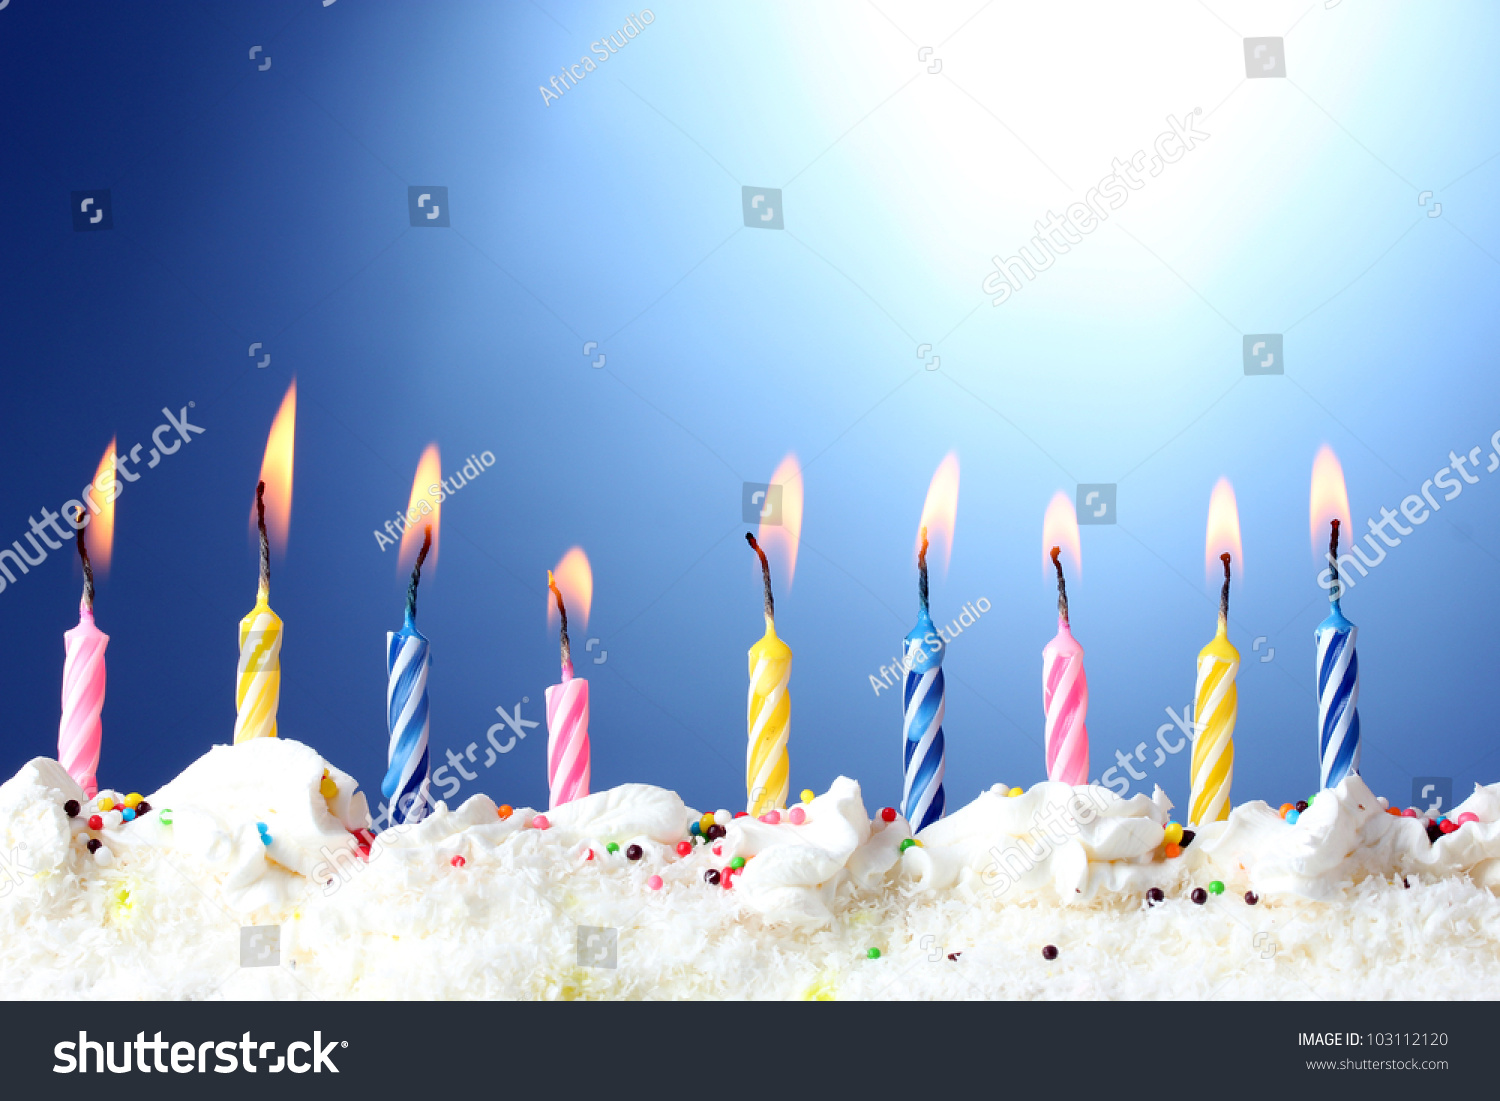 Beautiful Birthday Candles On Blue Background Stock Photo ...